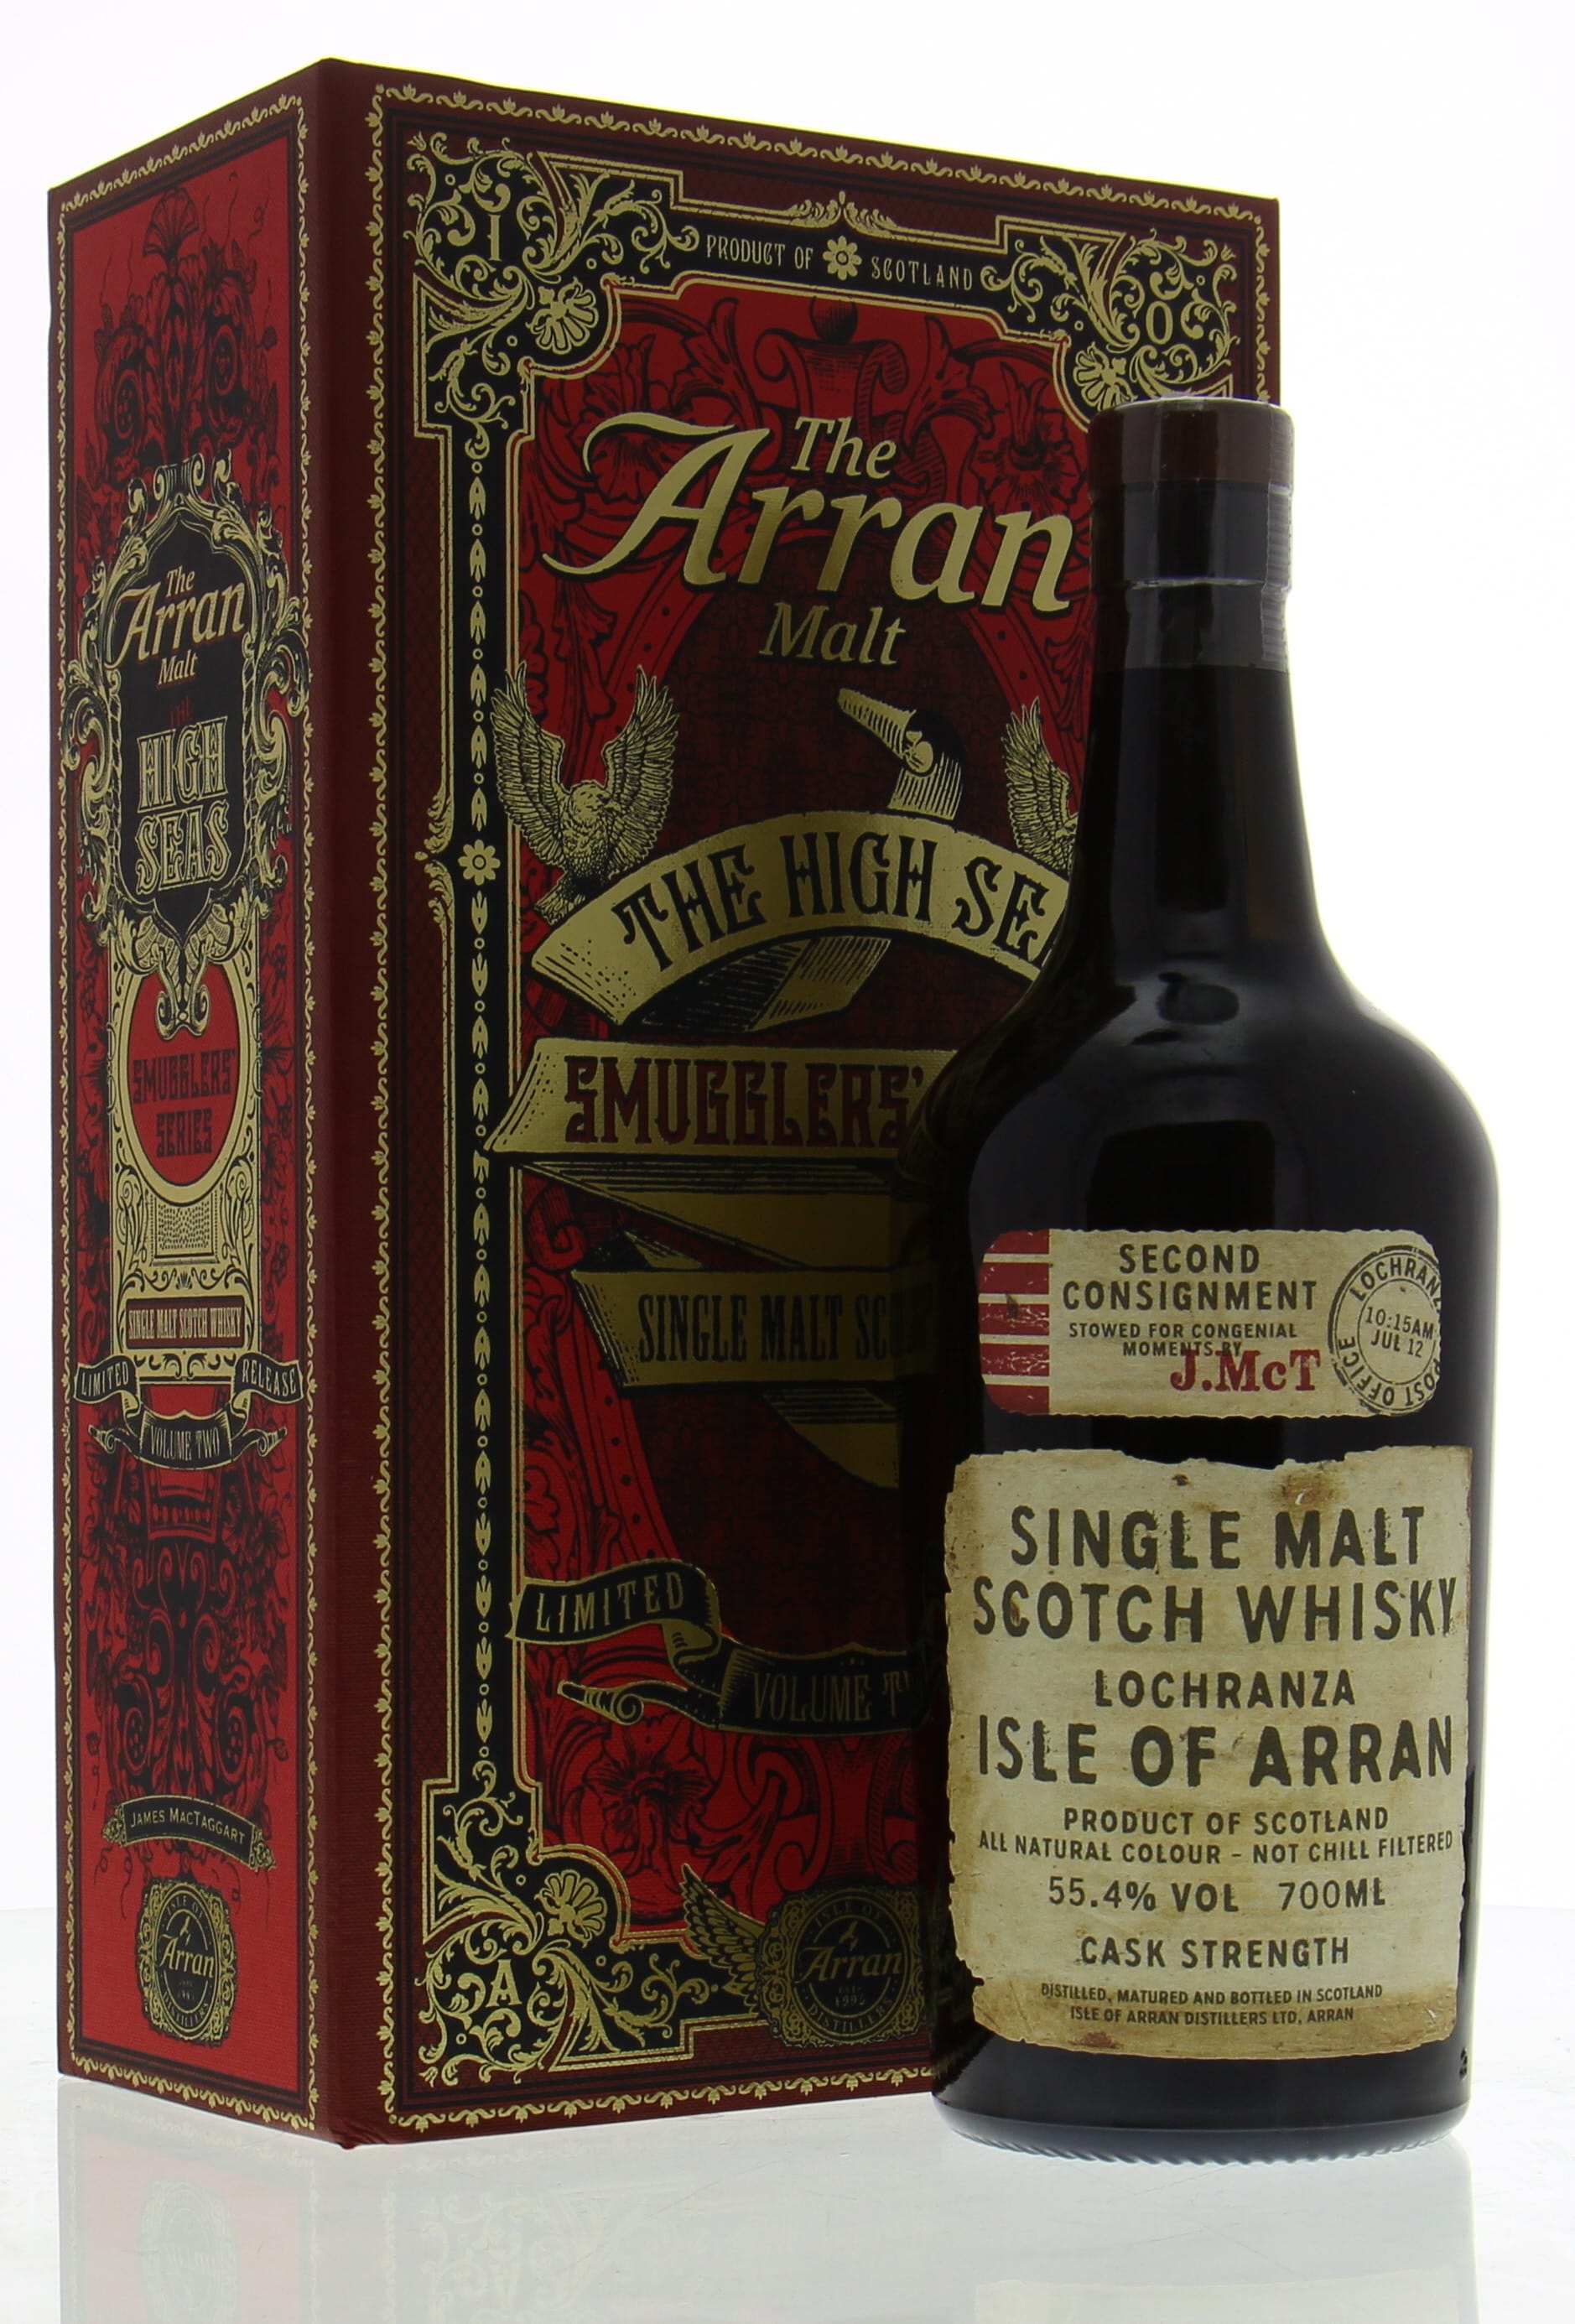 Arran - The High Seas Smugglers' Series Vol. 2 Limited Release 55,4% NV In Original Container